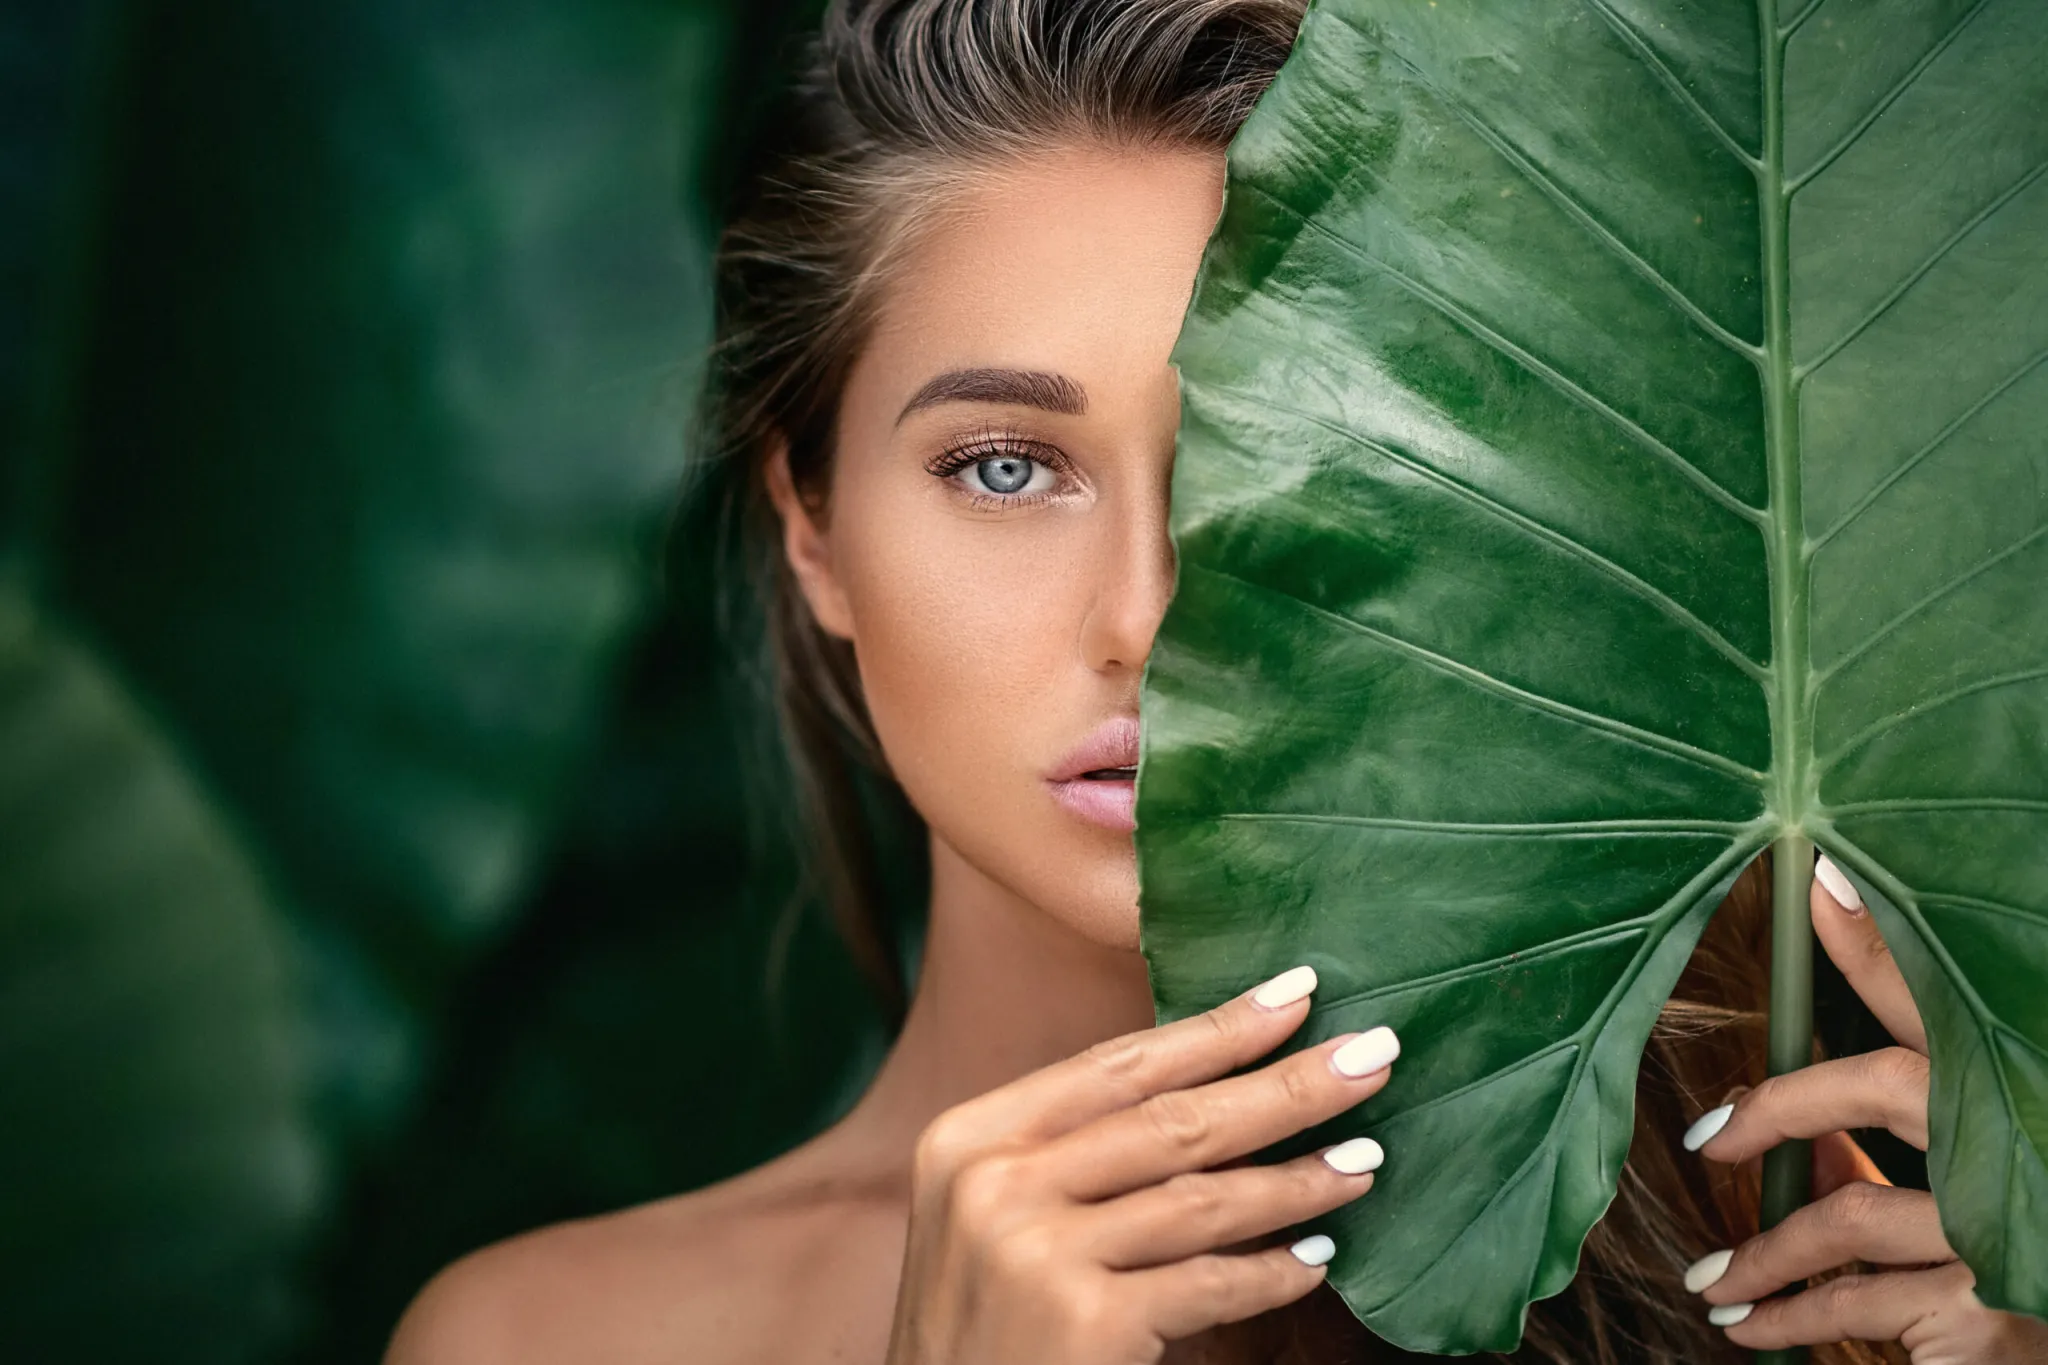 Young woman with a smooth skin holding monstera deliciosa plant leaf | Walnut Creek Aesthetics in Walnut Creek, CA